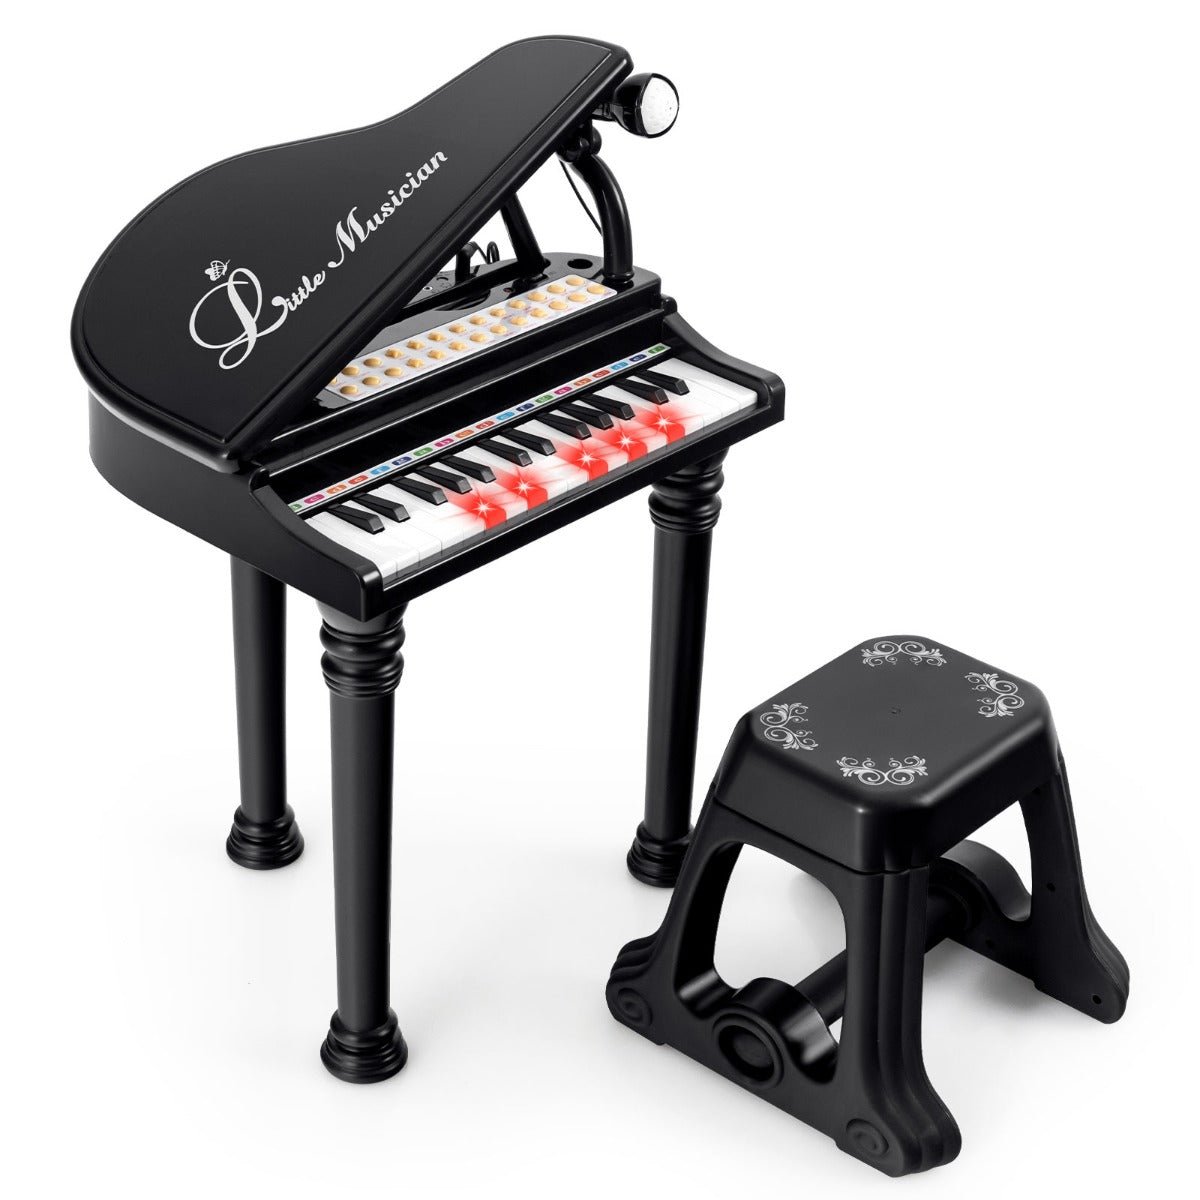 Shop the Black 31-Key Kids Piano Keyboard with Stool and Microphone